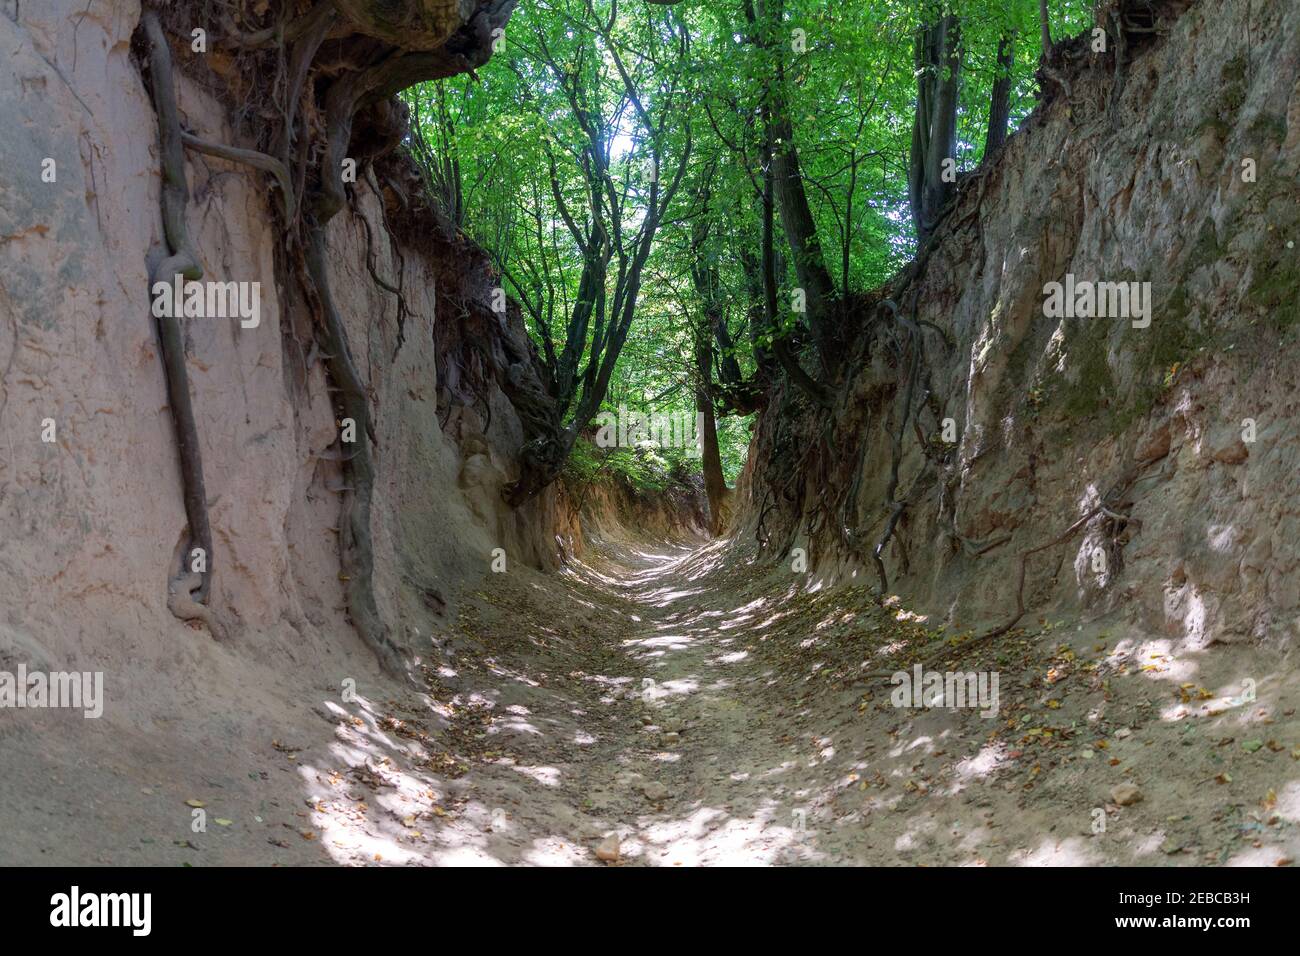 Loess ravine "Korzeniowy Dół" in the city of Kazimierz Dolny, Poland. Fantastic forms of trees and their roots that grow on the slopes Stock Photo